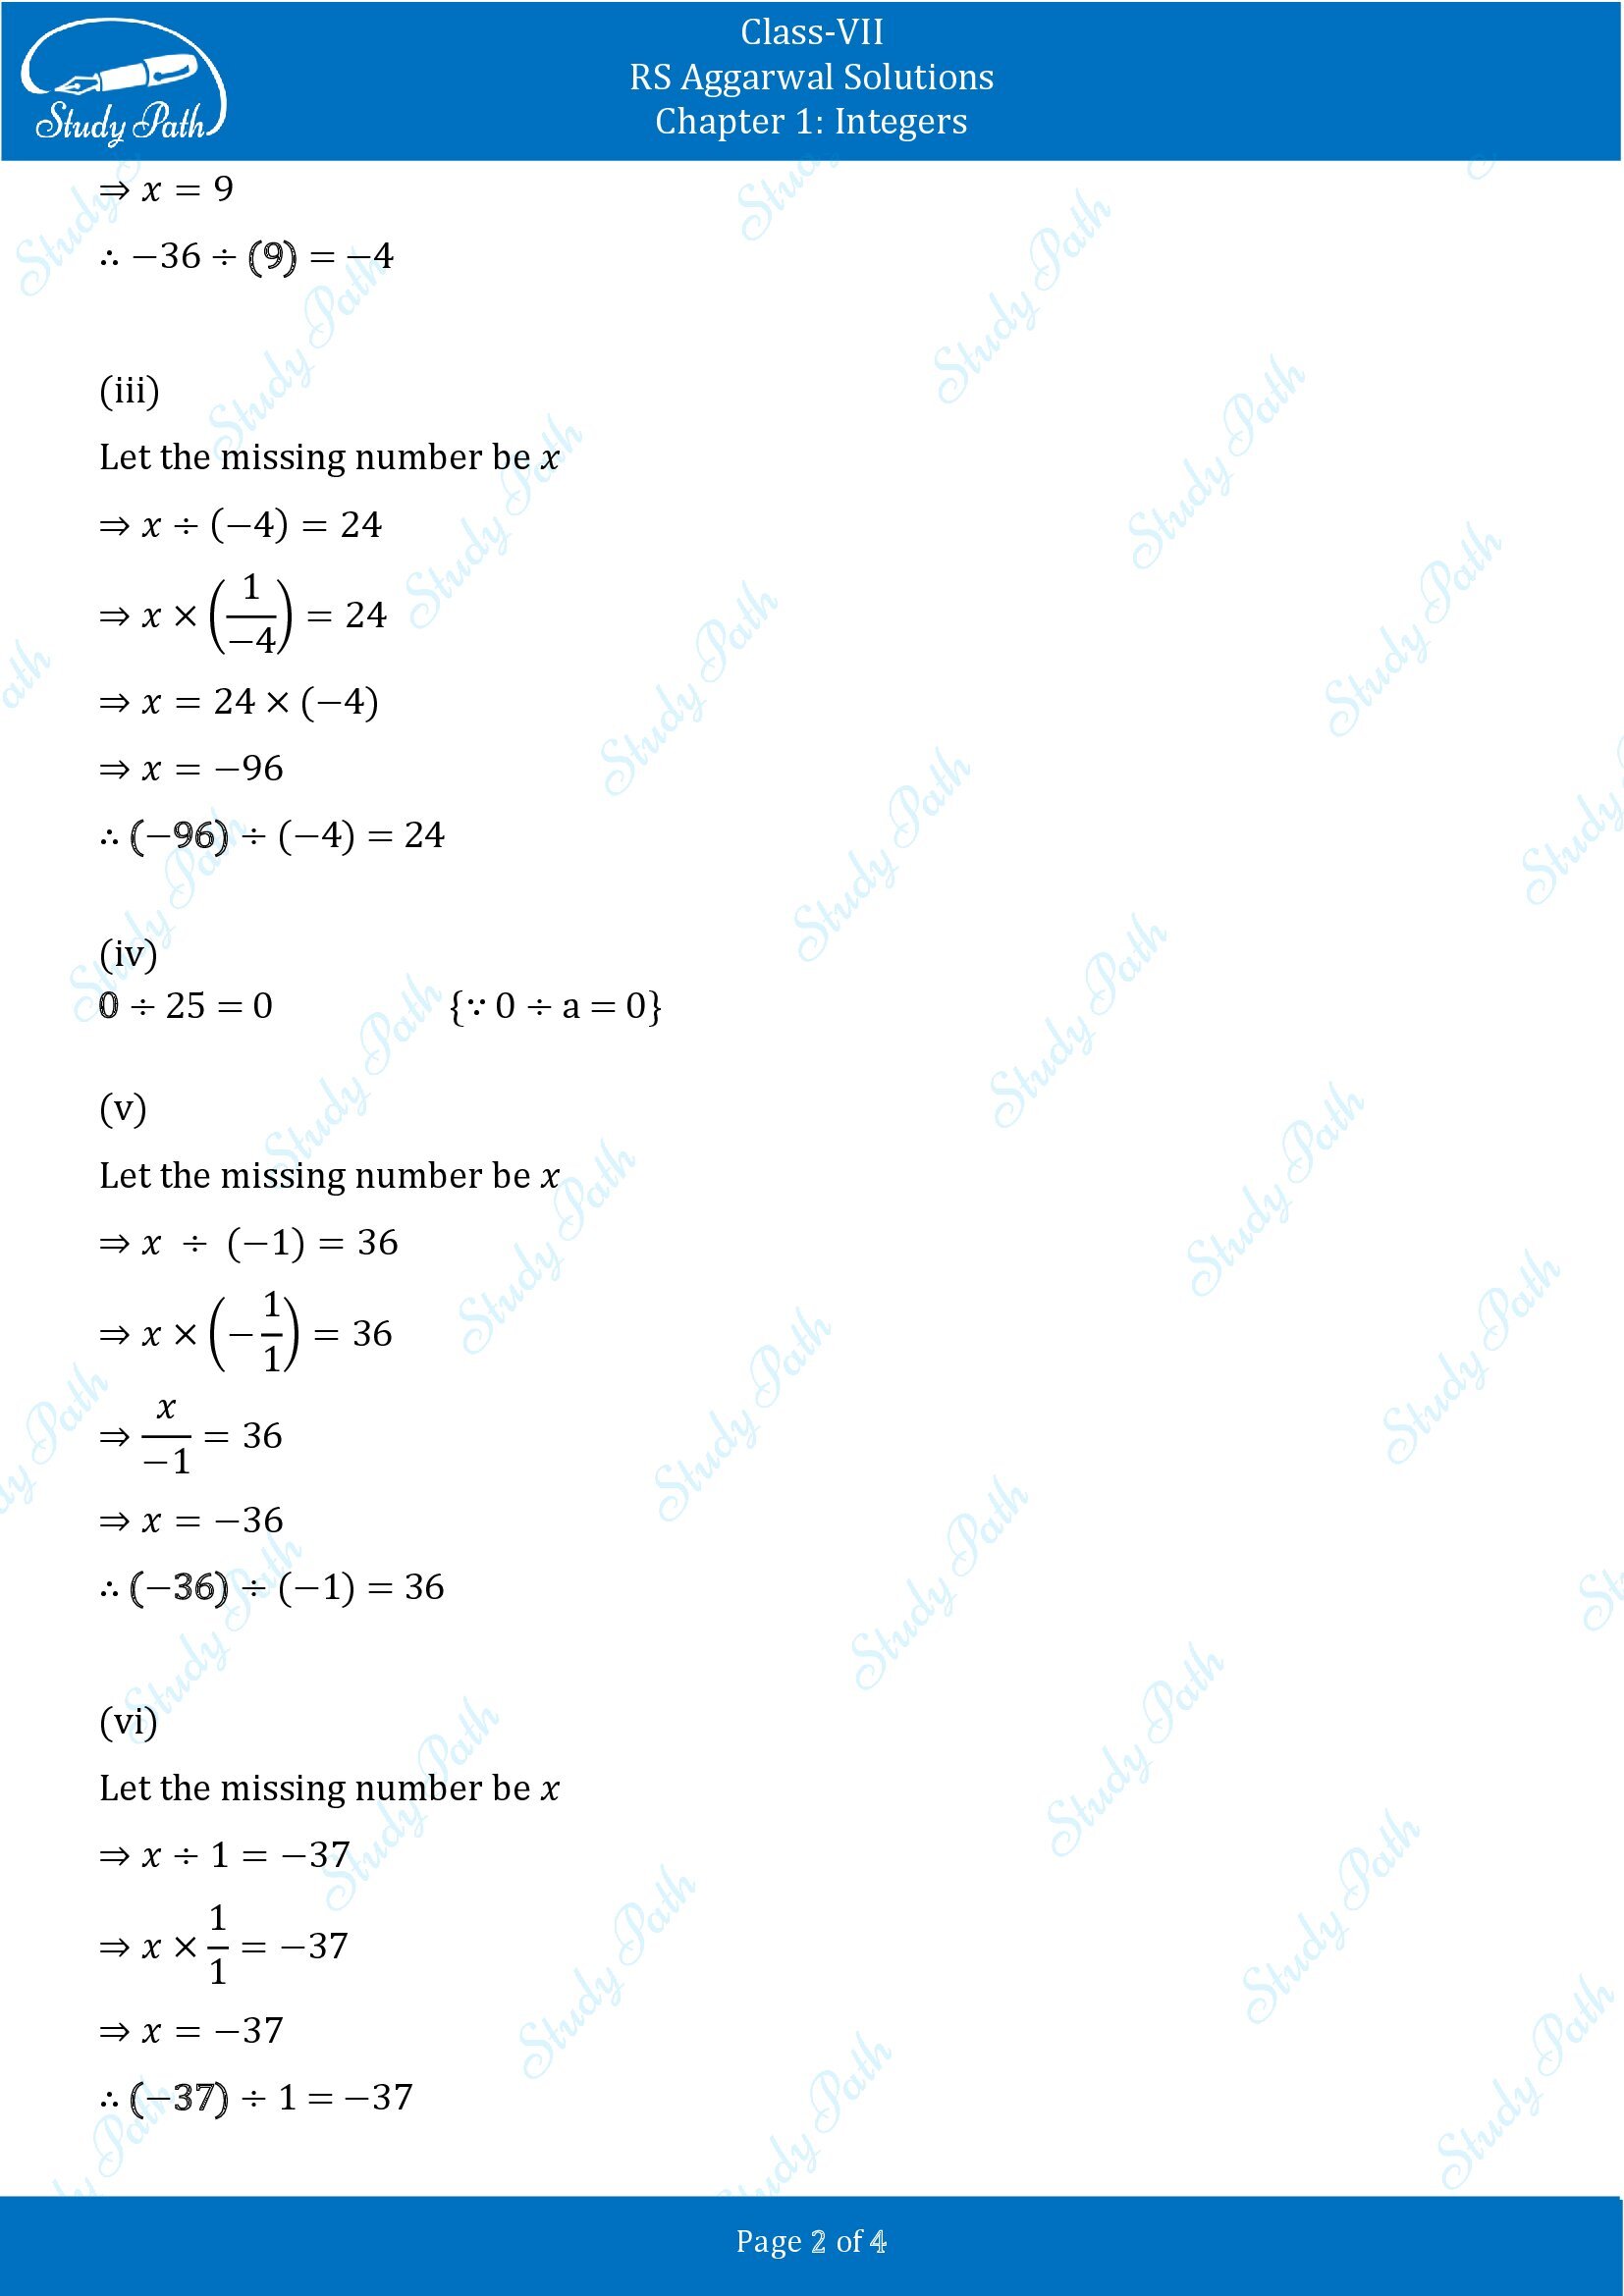 RS Aggarwal Solutions Class 7 Chapter 1 Integers Exercise 1C 002